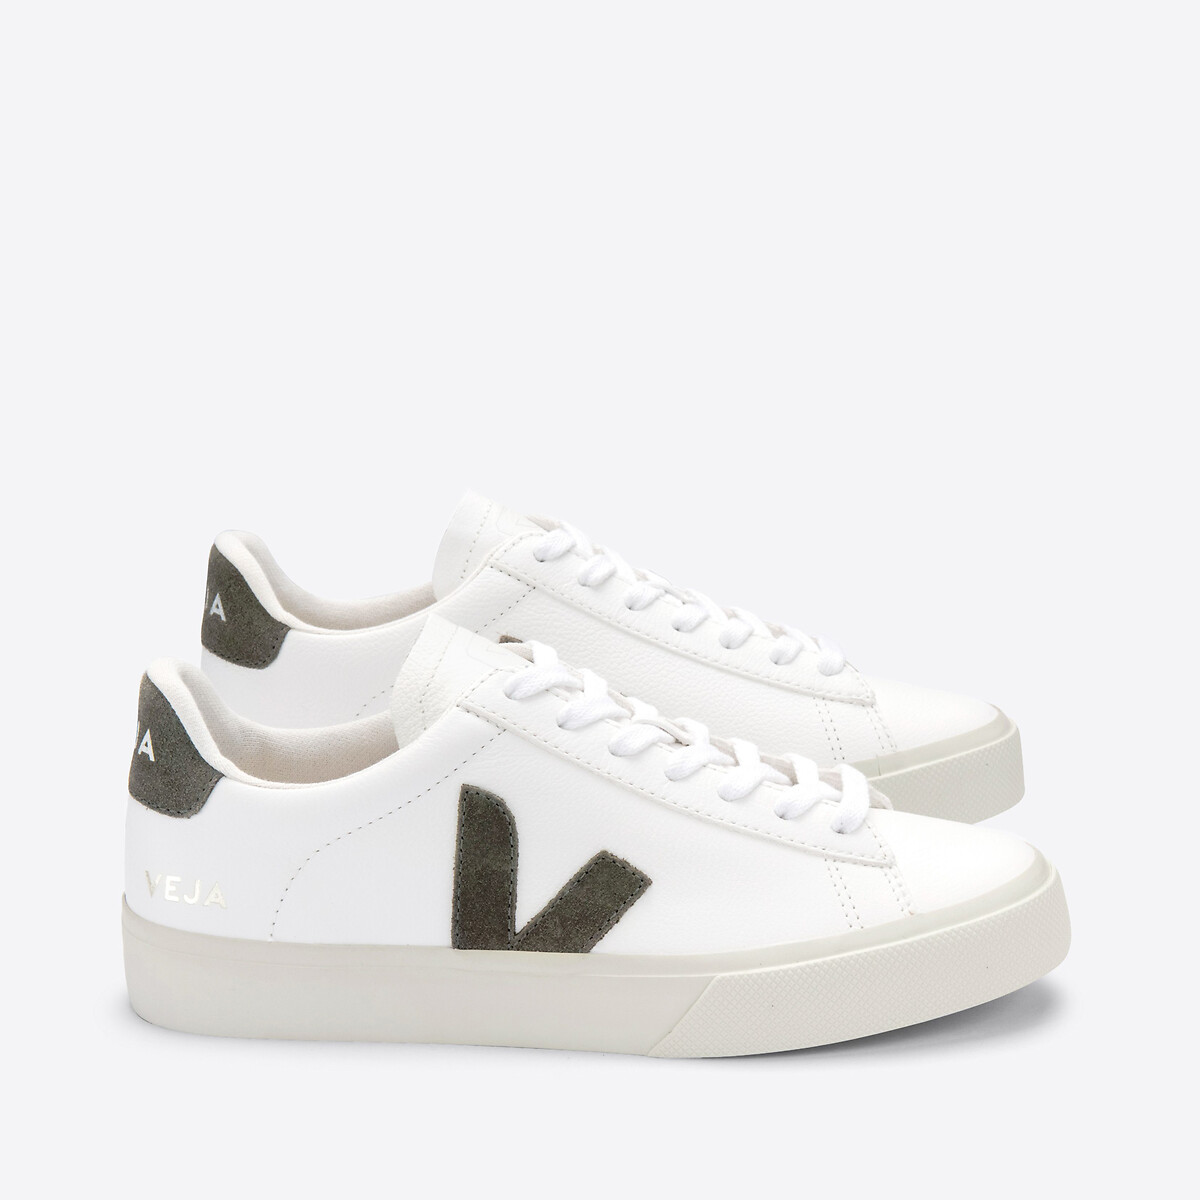 Image of Campo Chrome Free Flatform Trainers in Leather